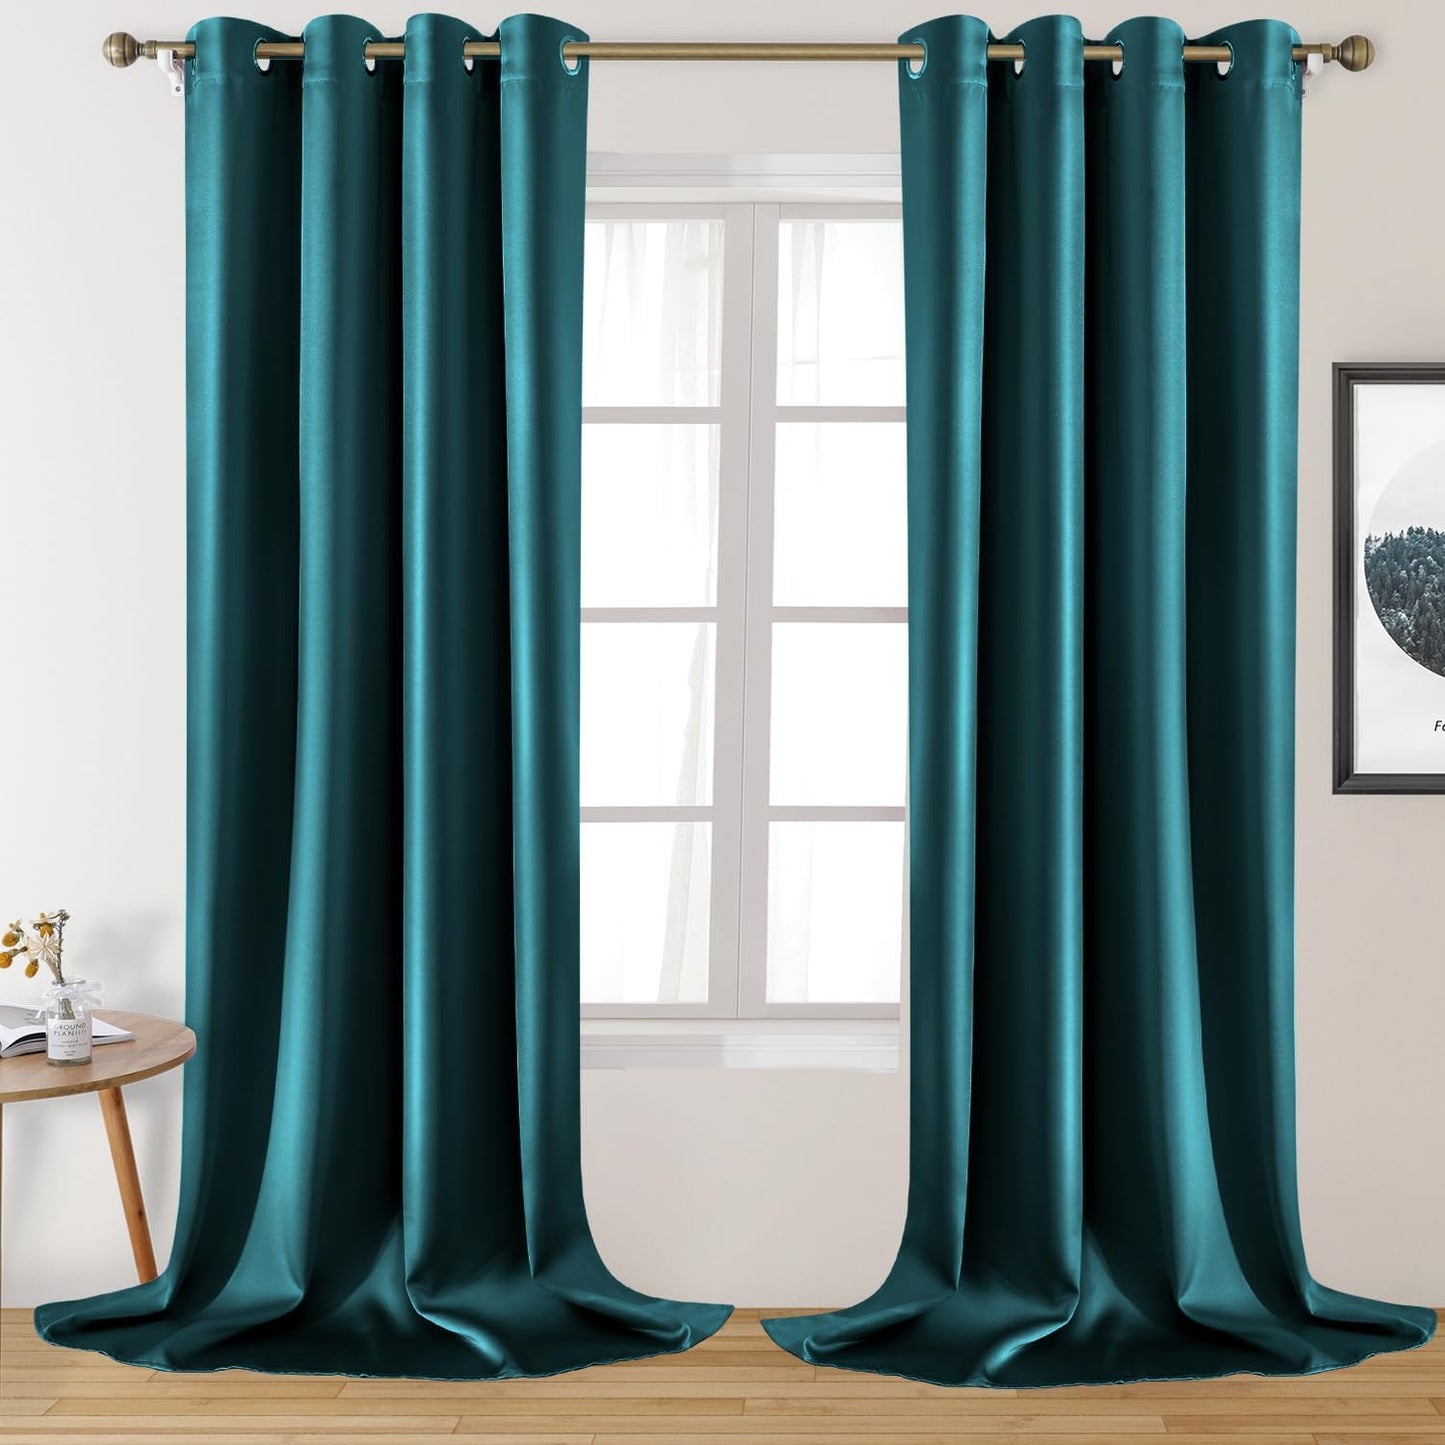 HOMEIDEAS Gold Blackout Curtains, Faux Silk for Bedroom 52 X 84 Inch Room Darkening Satin Thermal Insulated Drapes for Window, Indoor, Living Room, 2 Panels  HOMEIDEAS Teal 52" X 108" 